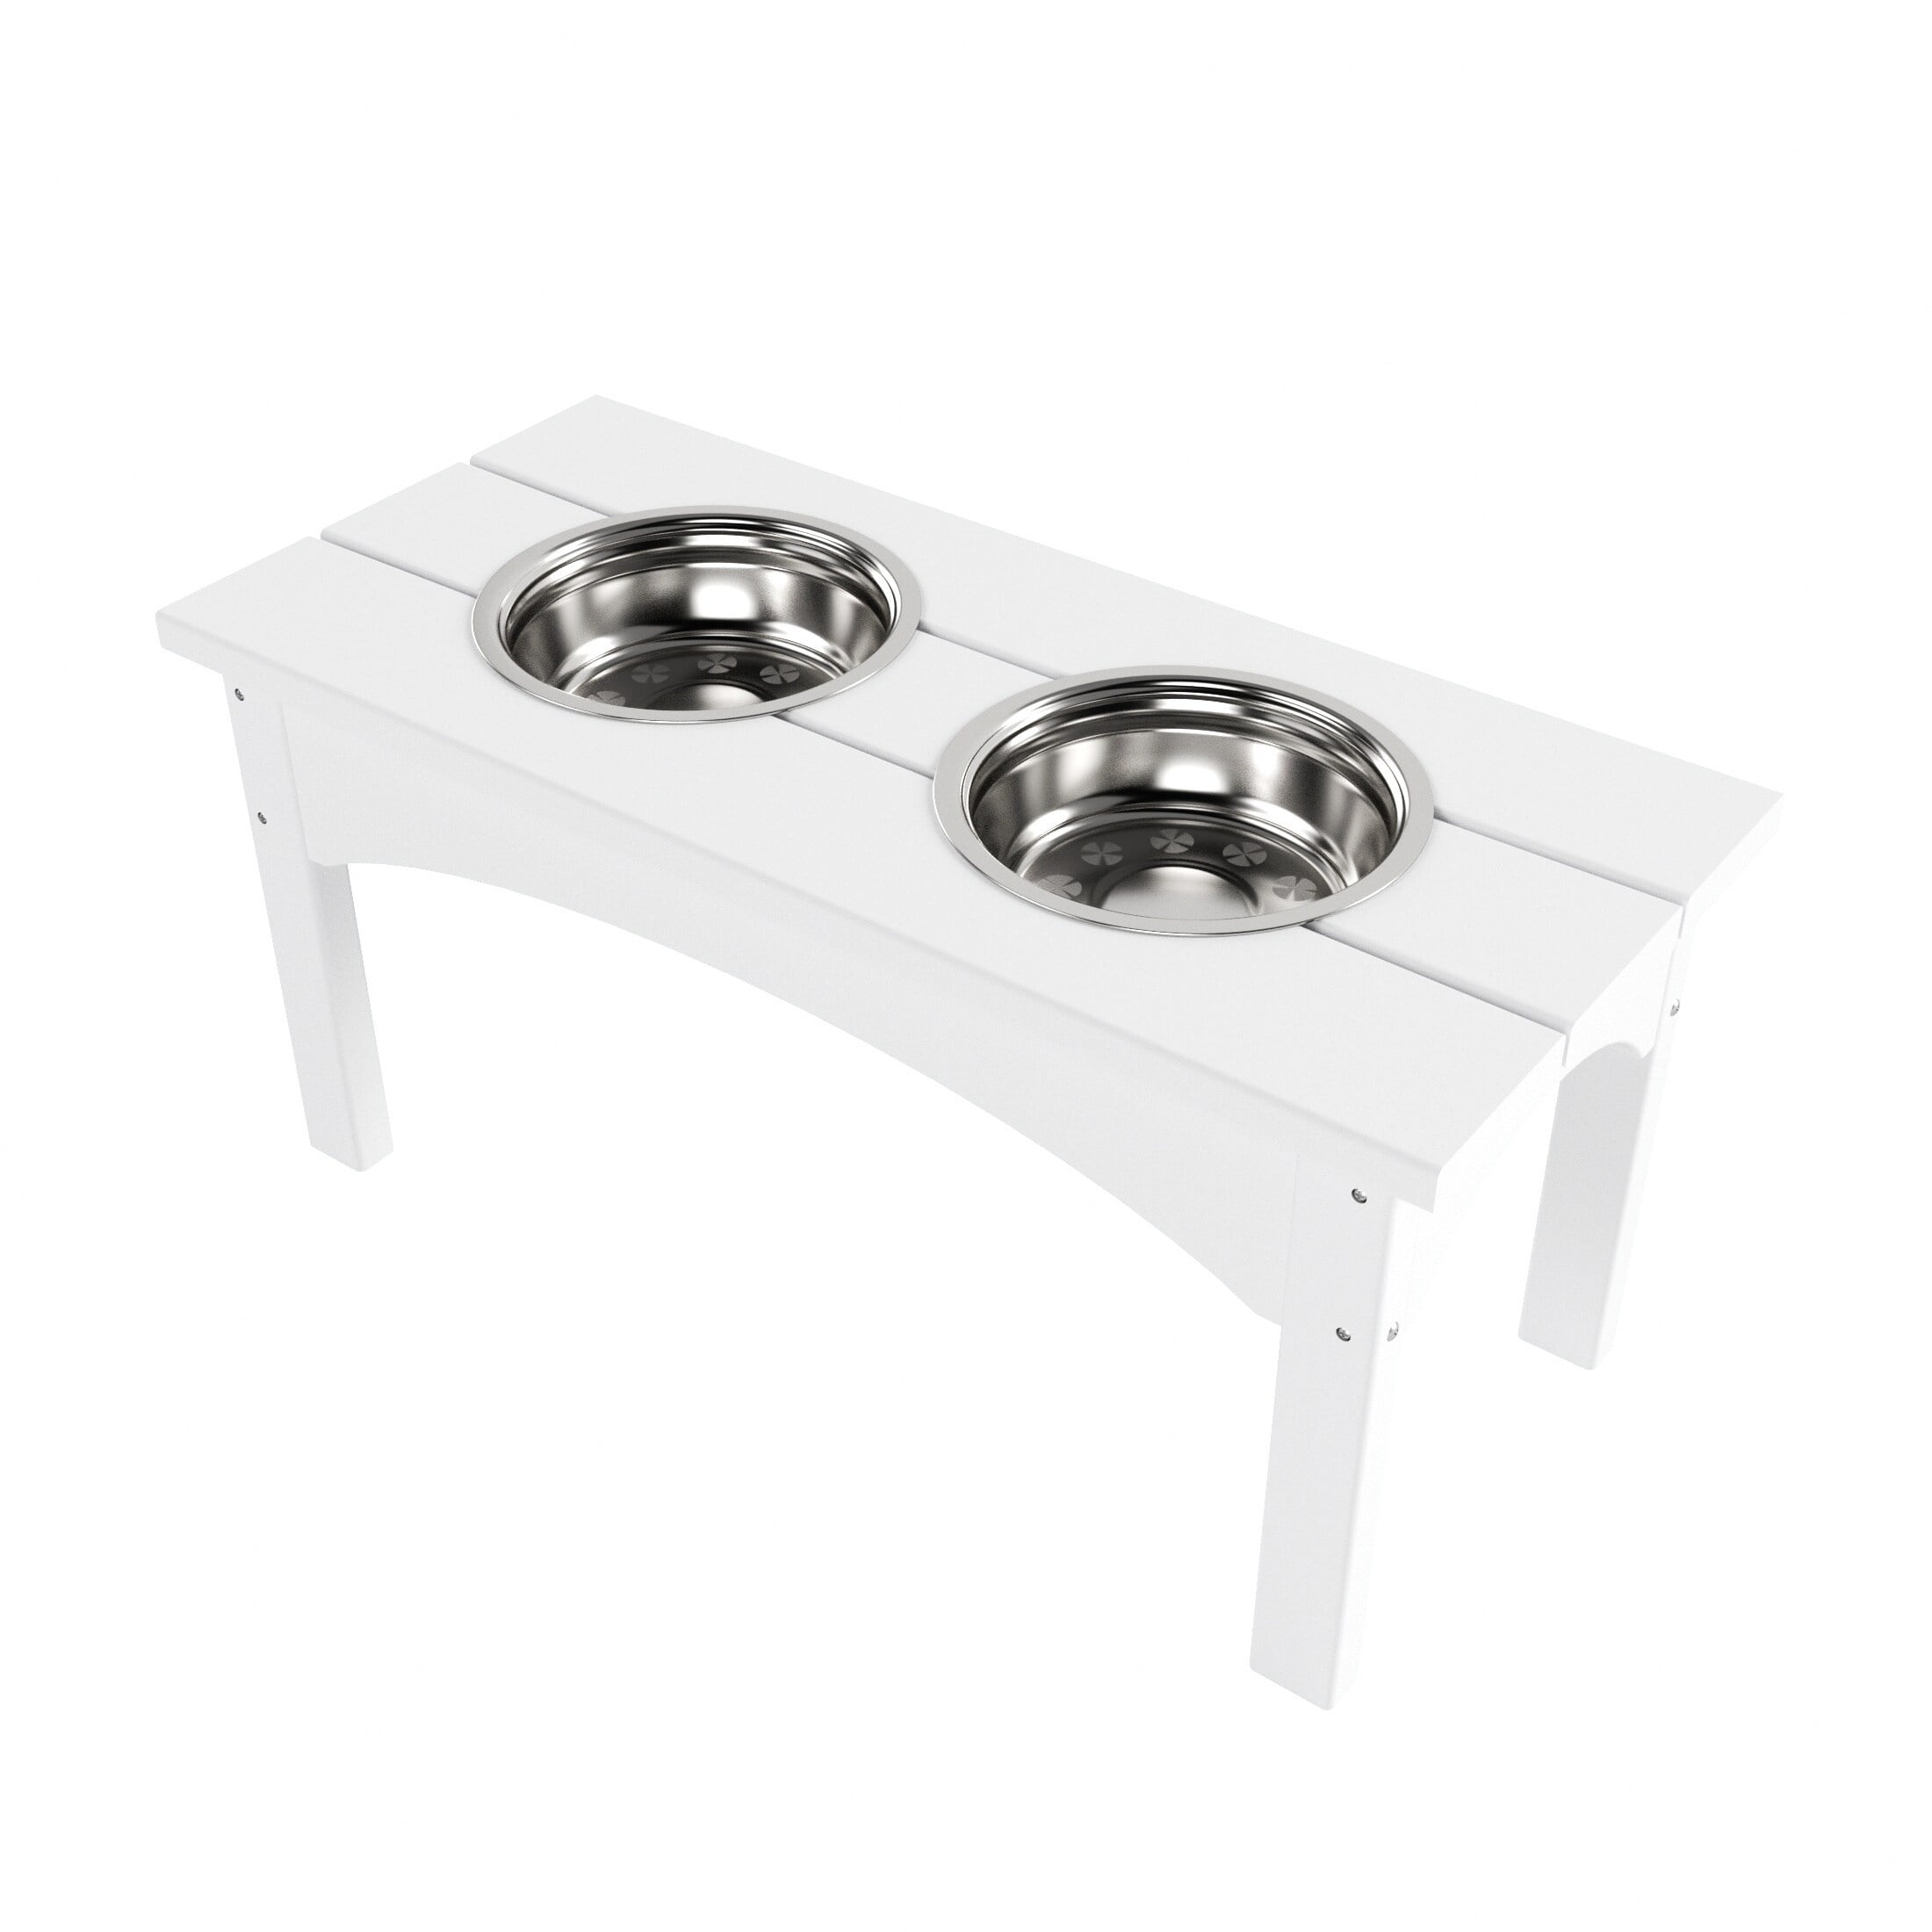 Pet Adobe Stainless Steel Elevated Pet Bowls - Stainless Steel - 20341498